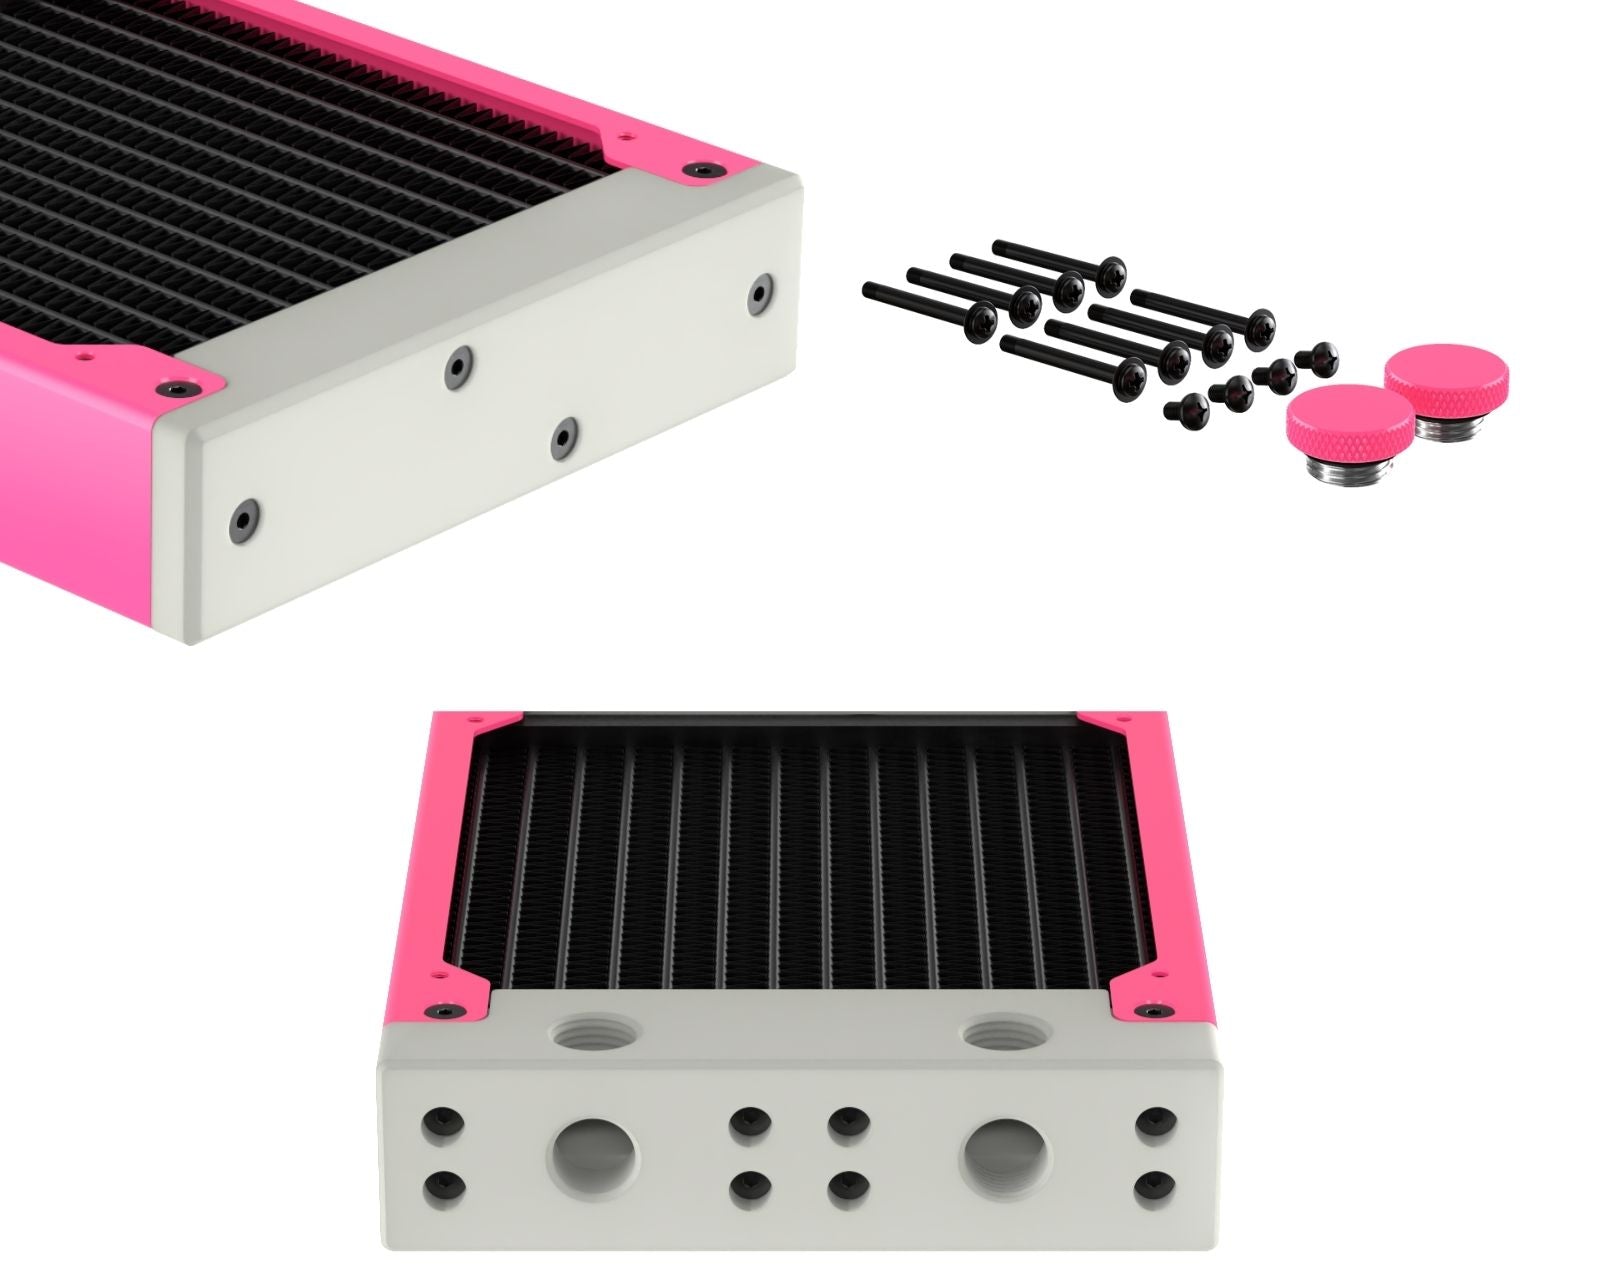 PrimoChill 240SL (30mm) EXIMO Modular Radiator, White POM, 2x120mm, Dual Fan (R-SL-W24) Available in 20+ Colors, Assembled in USA and Custom Watercooling Loop Ready - UV Pink